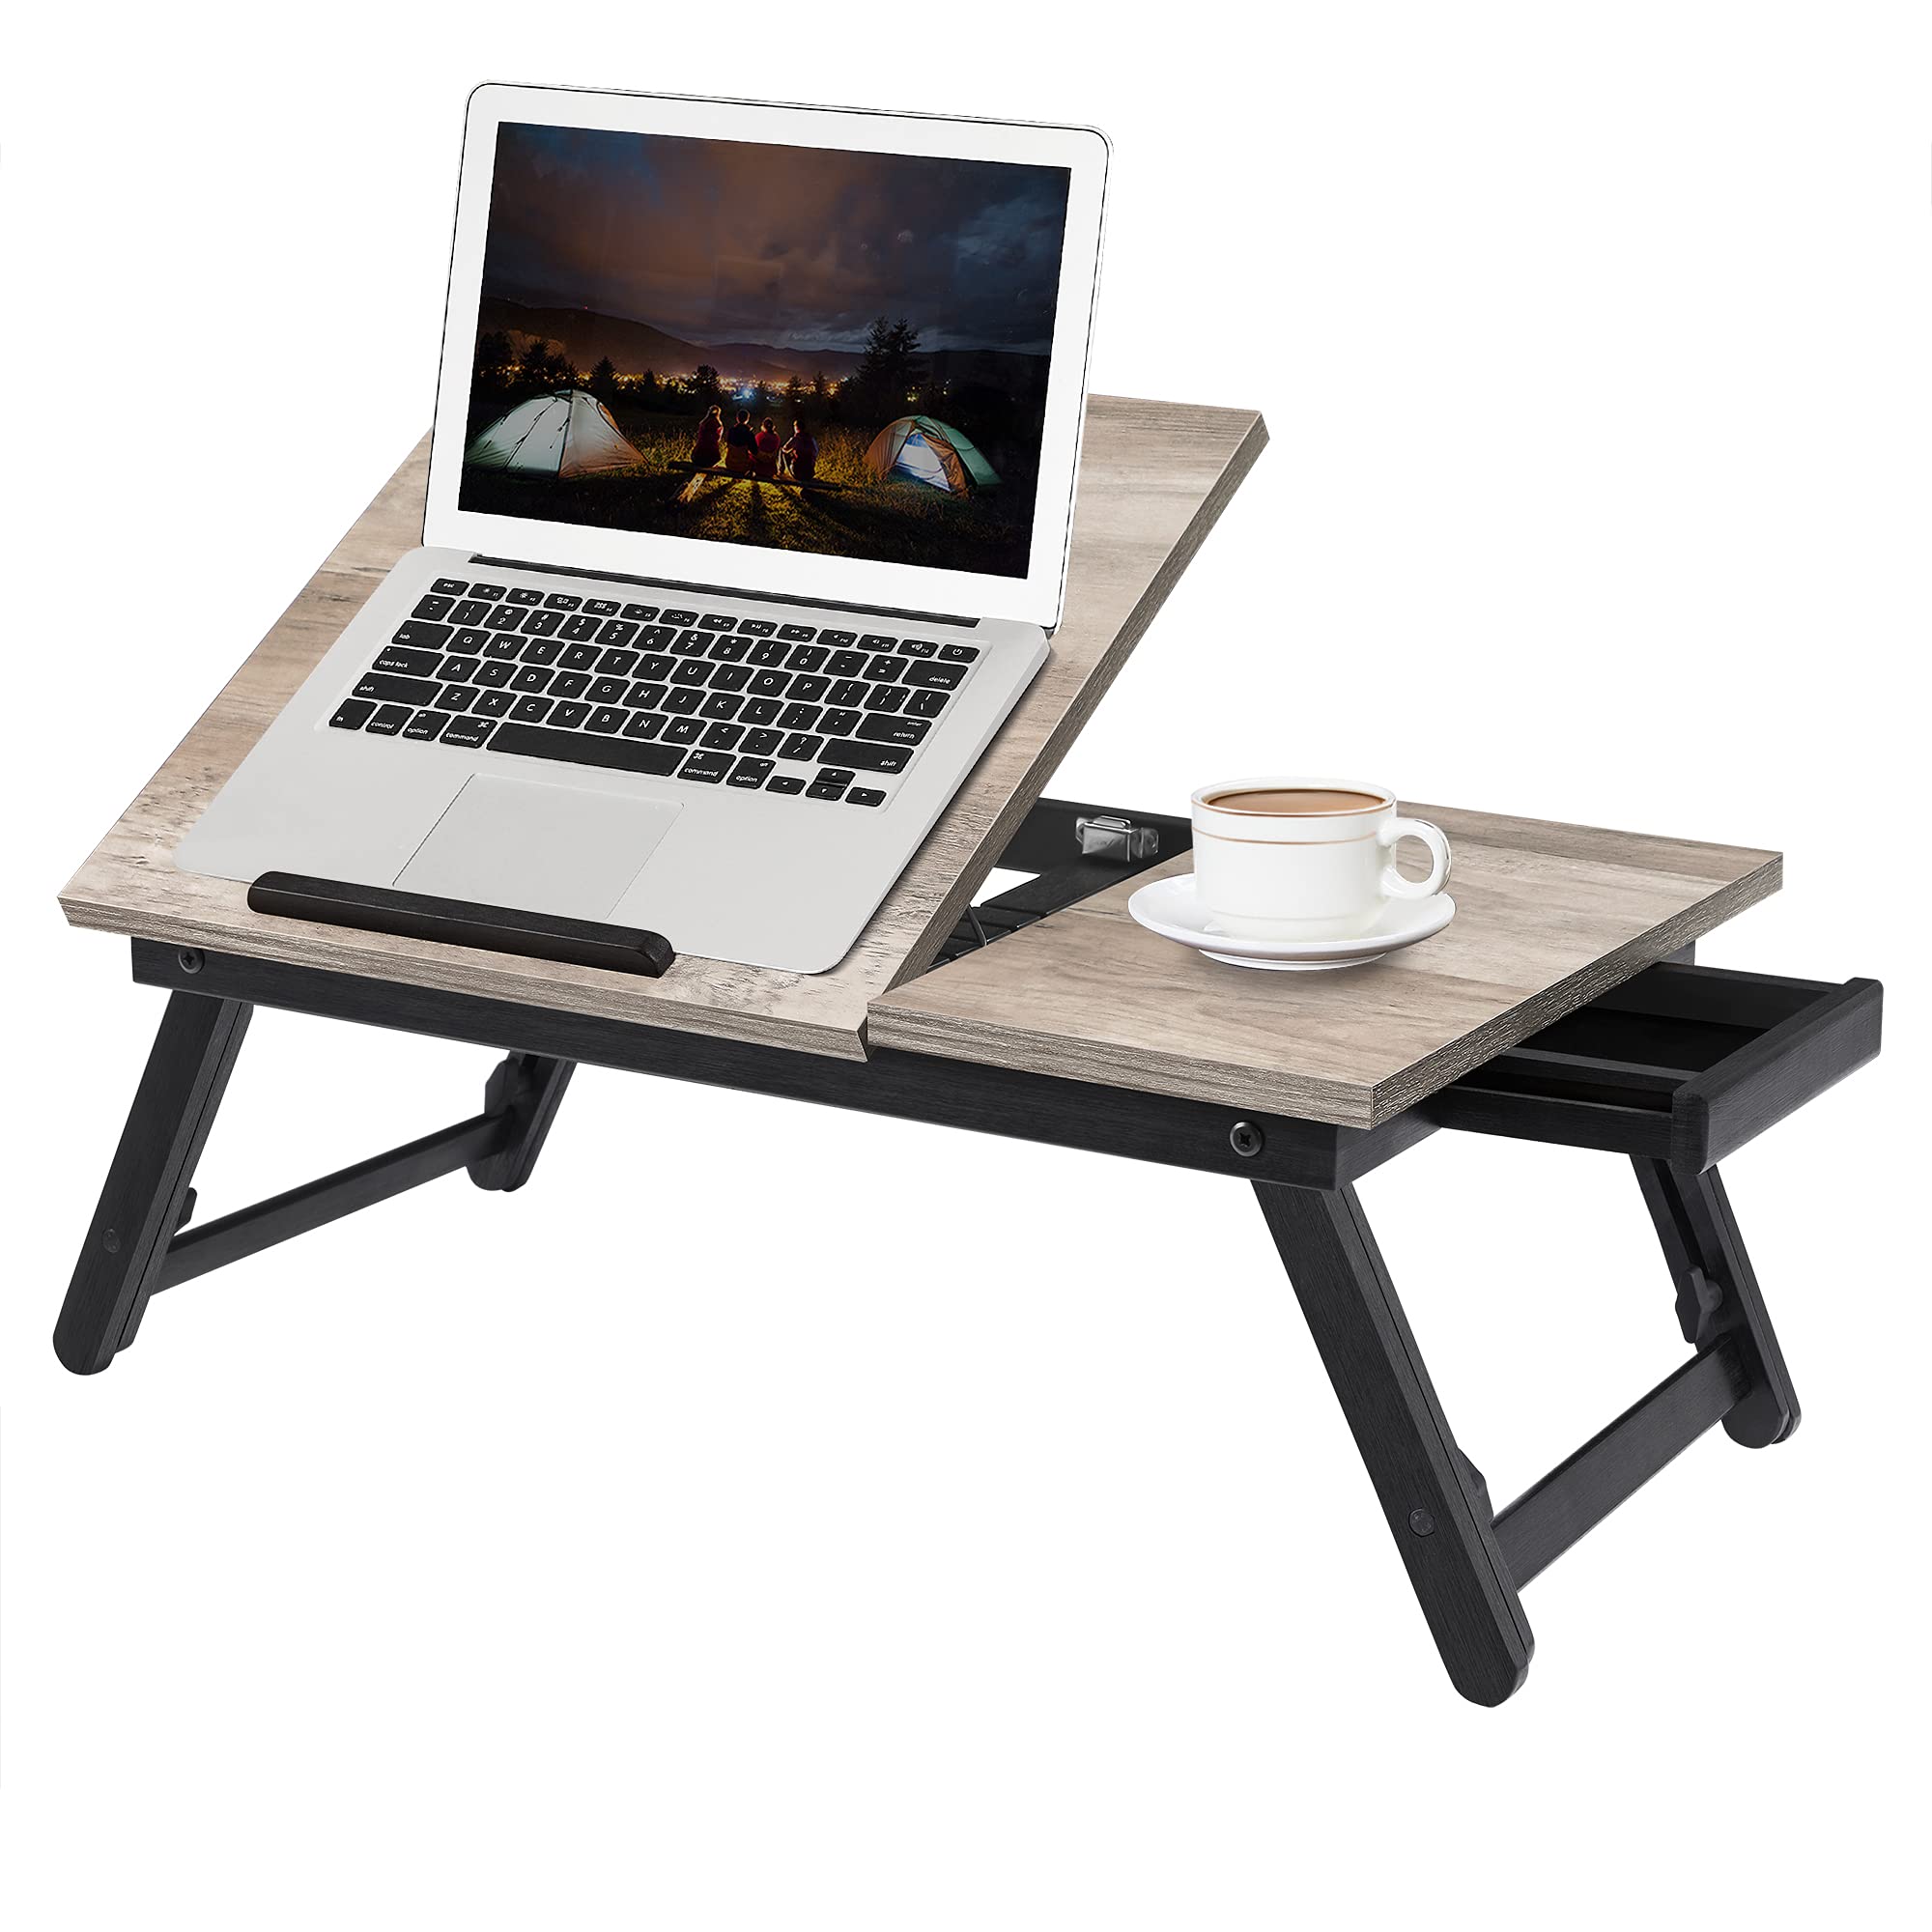 SONGMICS Laptop Desk for Bed or Sofa with Adjustable Tilting Top, Breakfast Serving Tray with Height Adjustable Folding Legs, Fits Screen Size up to 15.6 Inches, Floor Desk, Greige ULLD105W01